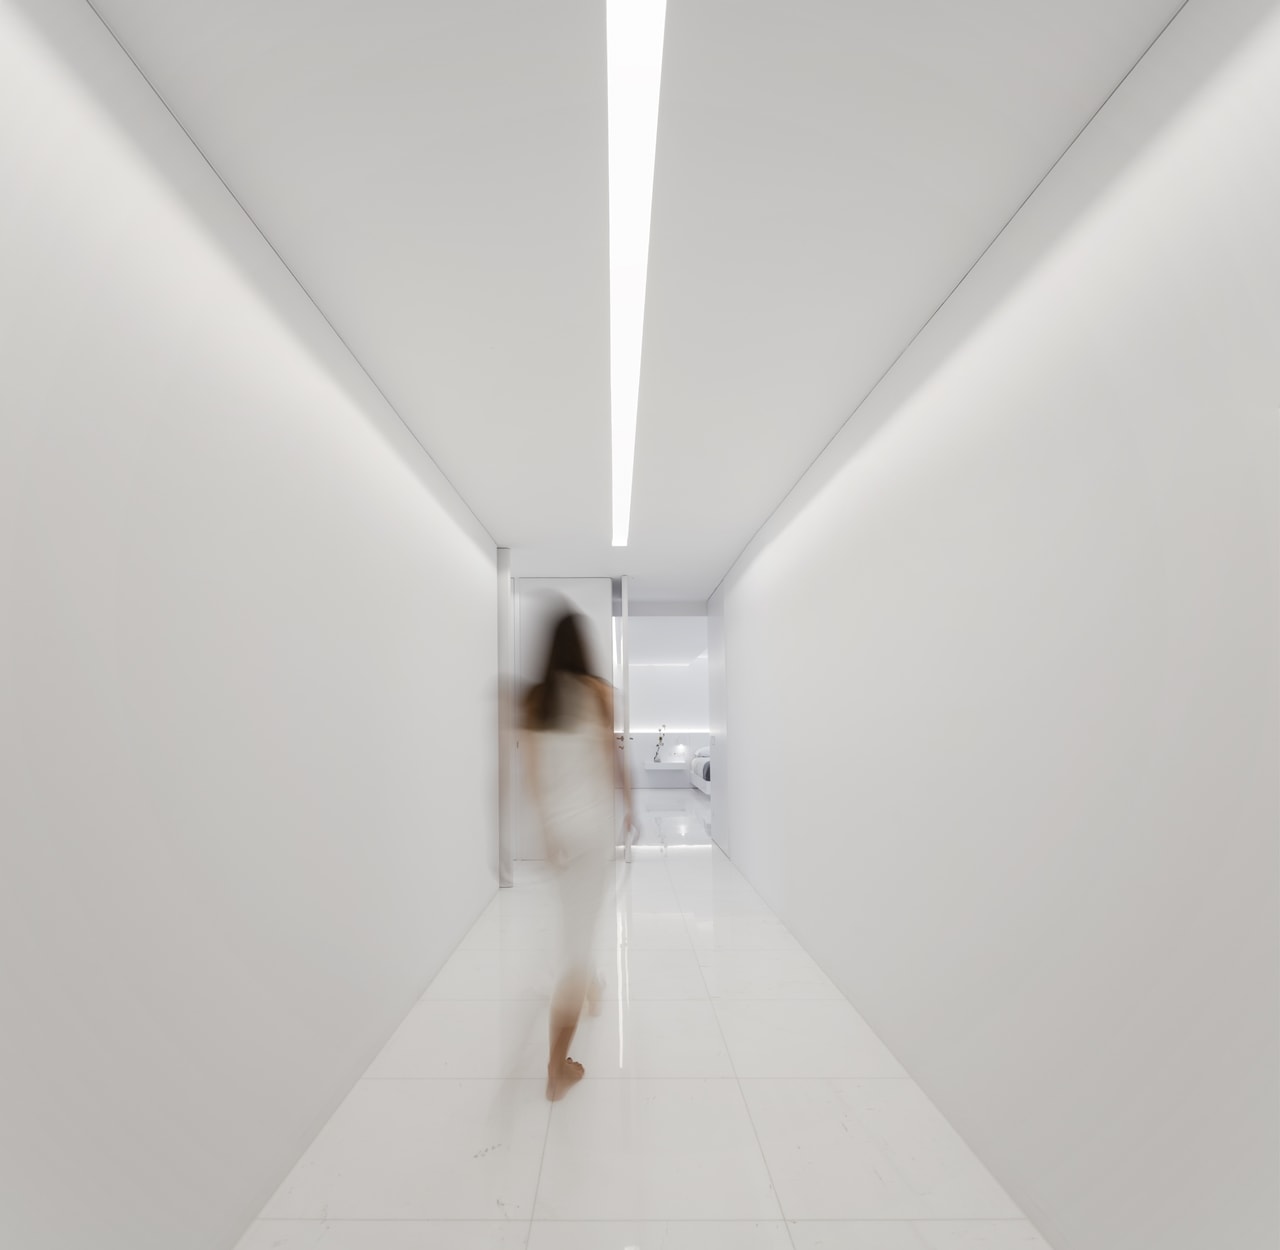 All white interior in minimalist house designed by Fran Silvestre Architects